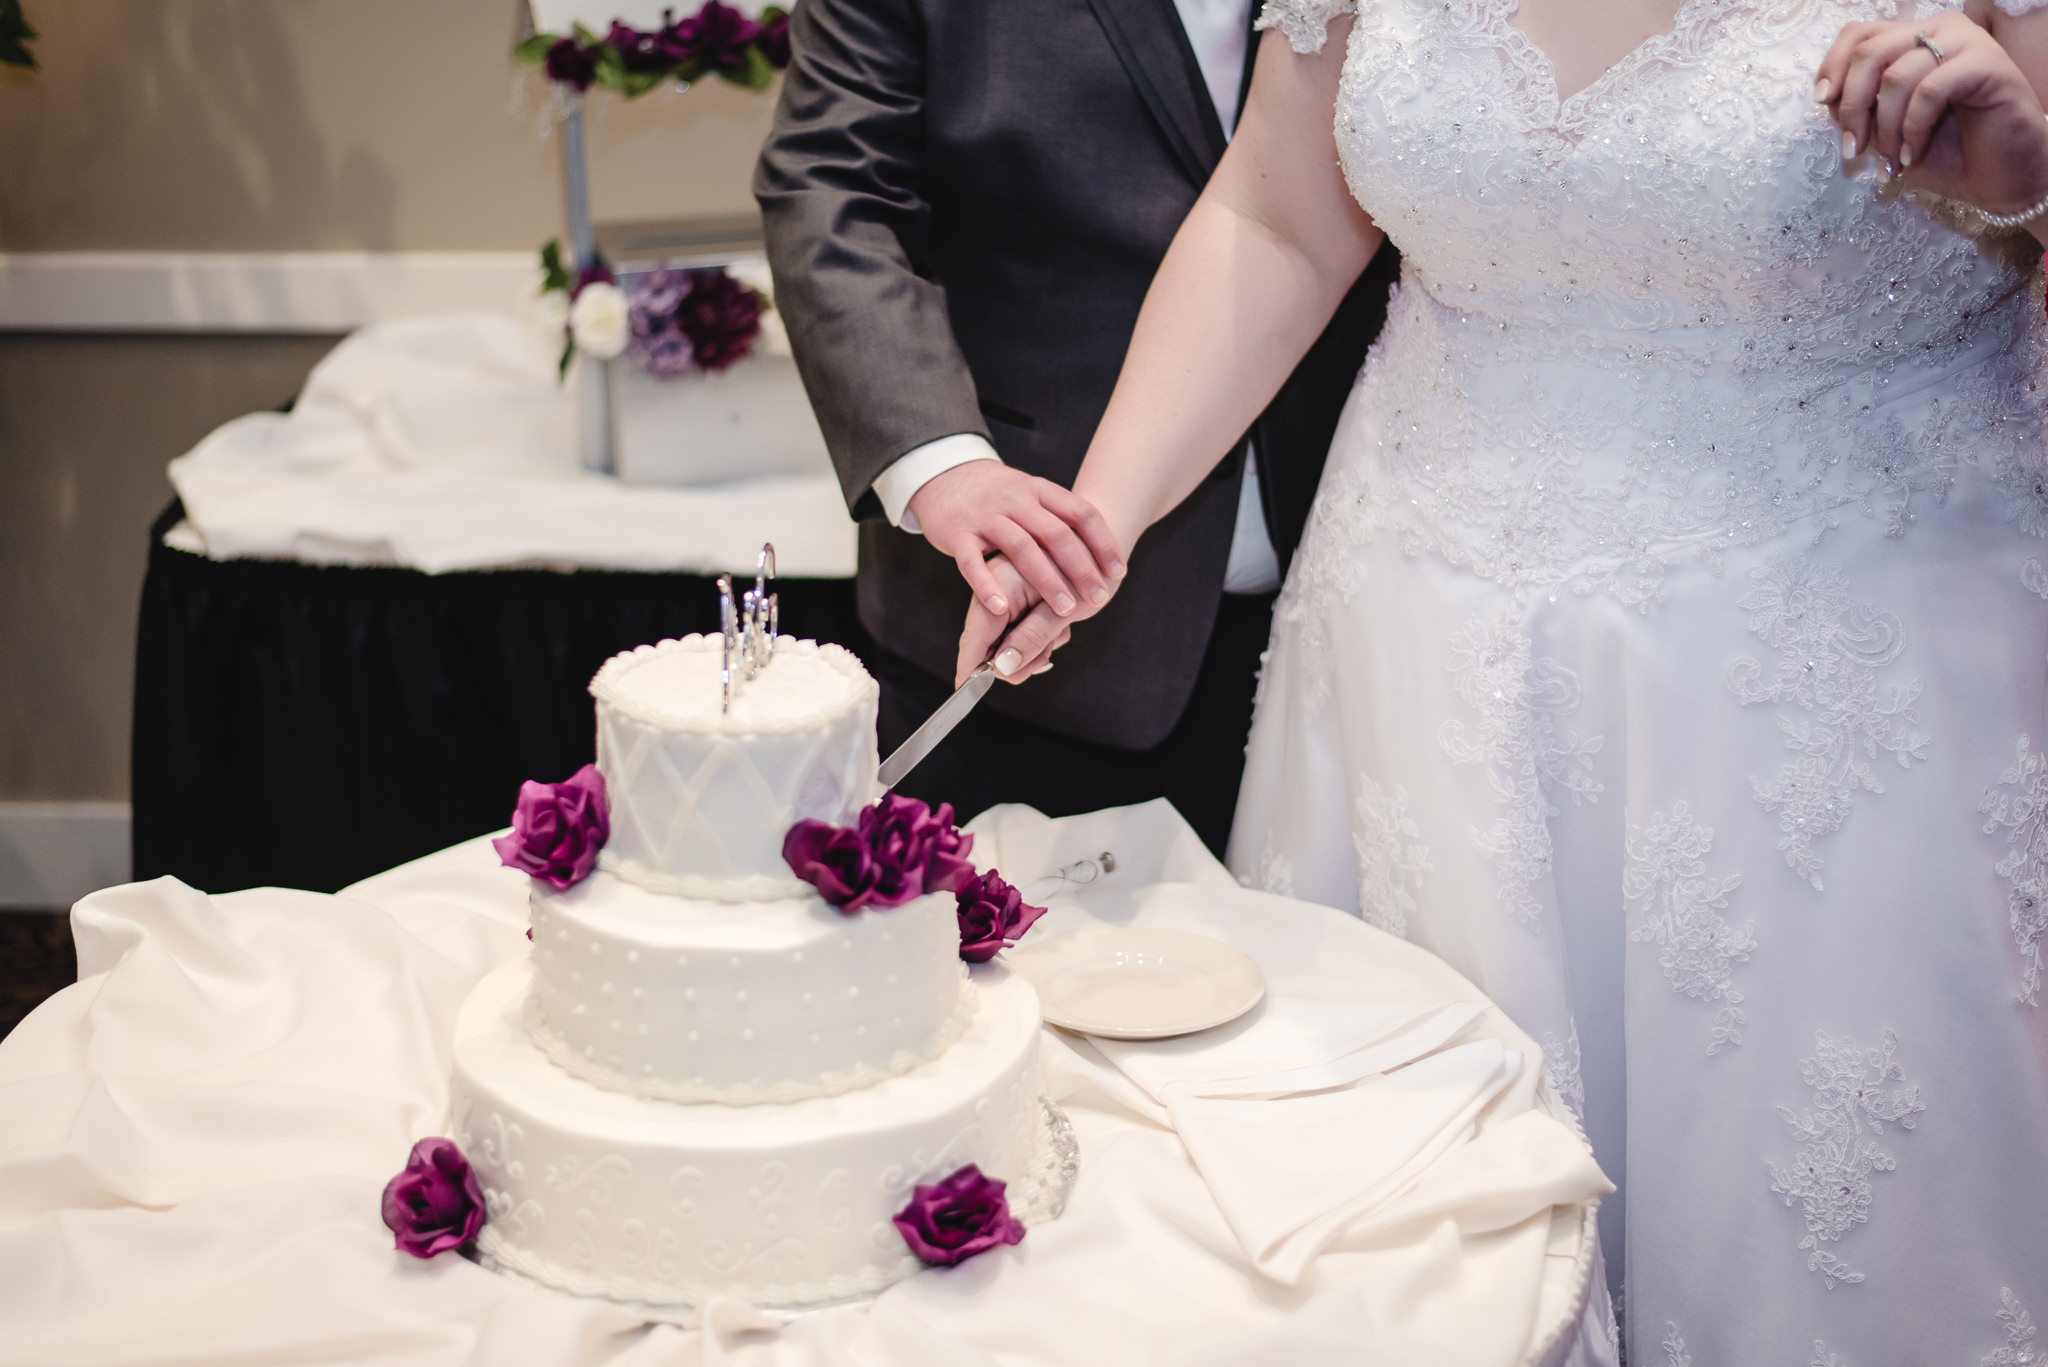 Bride and groom cut the cake at their Fez wedding reception